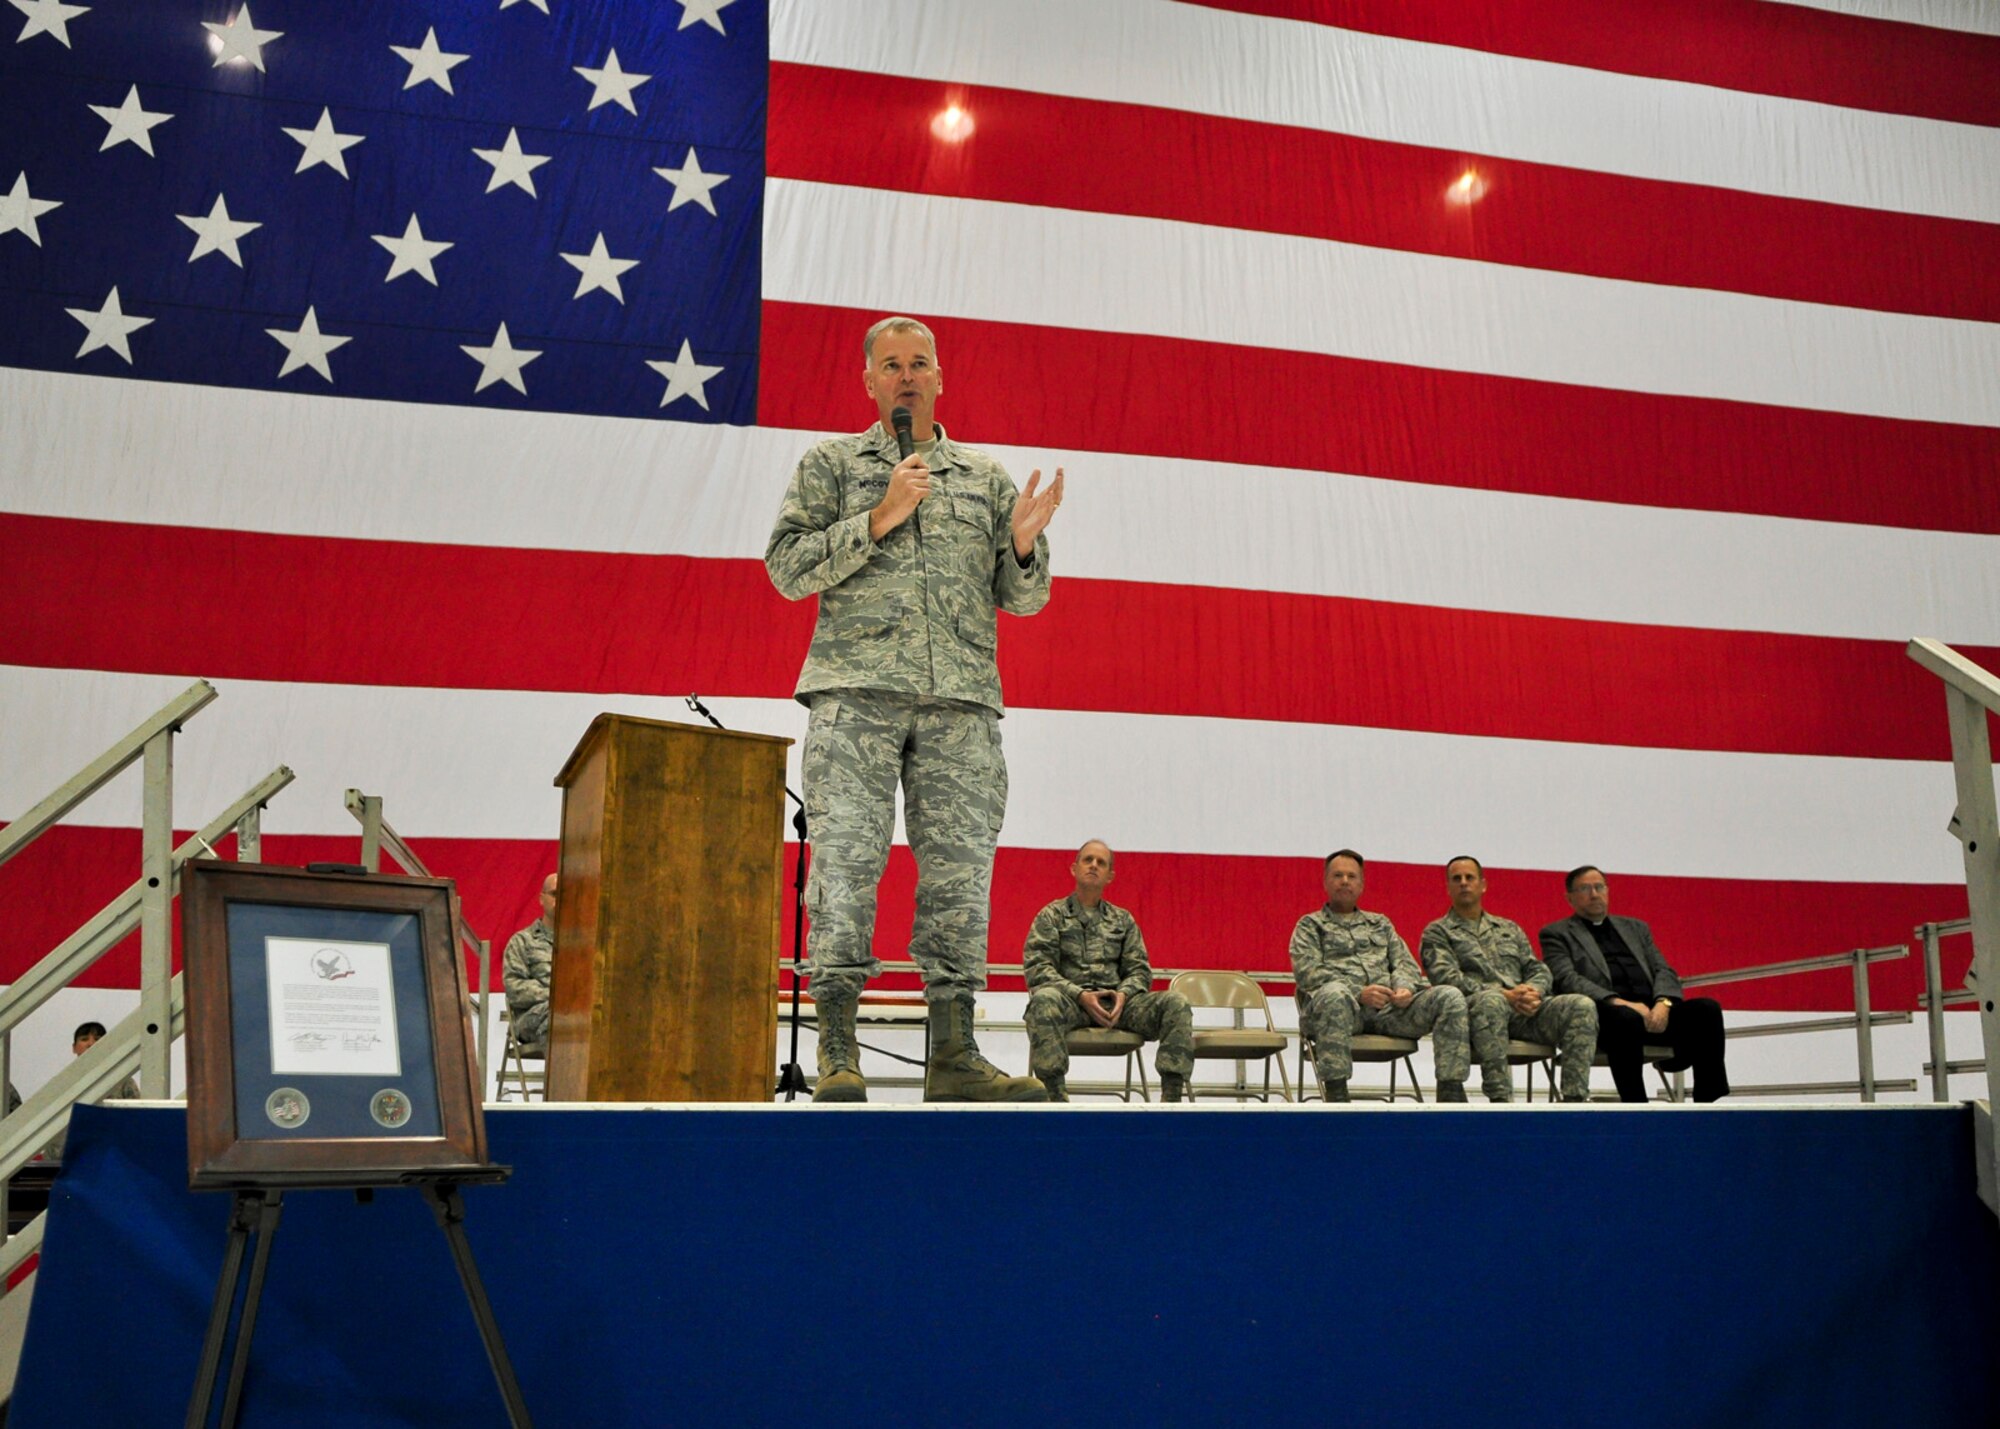 Brig. Gen. John E. McCoy, Wisconsin's assistant adjutant general for Air, addresses a gathered crowd of Airmen and family members during a Hometown Heroes Salute Campaign award ceremony at the 128th Air Refueling Wing, Milwaukee, on Sunday, December 4, 2011.  Gen. McCoy applauded the recipient Airmen's ability to "do the work America asks of us."  The Hometown Heroes Salute Campaign is an Air National Guard event that recognizes Airmen who have deployed overseas for more than 30 days.  Air National Guard photo by Tech. Sgt. Tom Sobczyk.